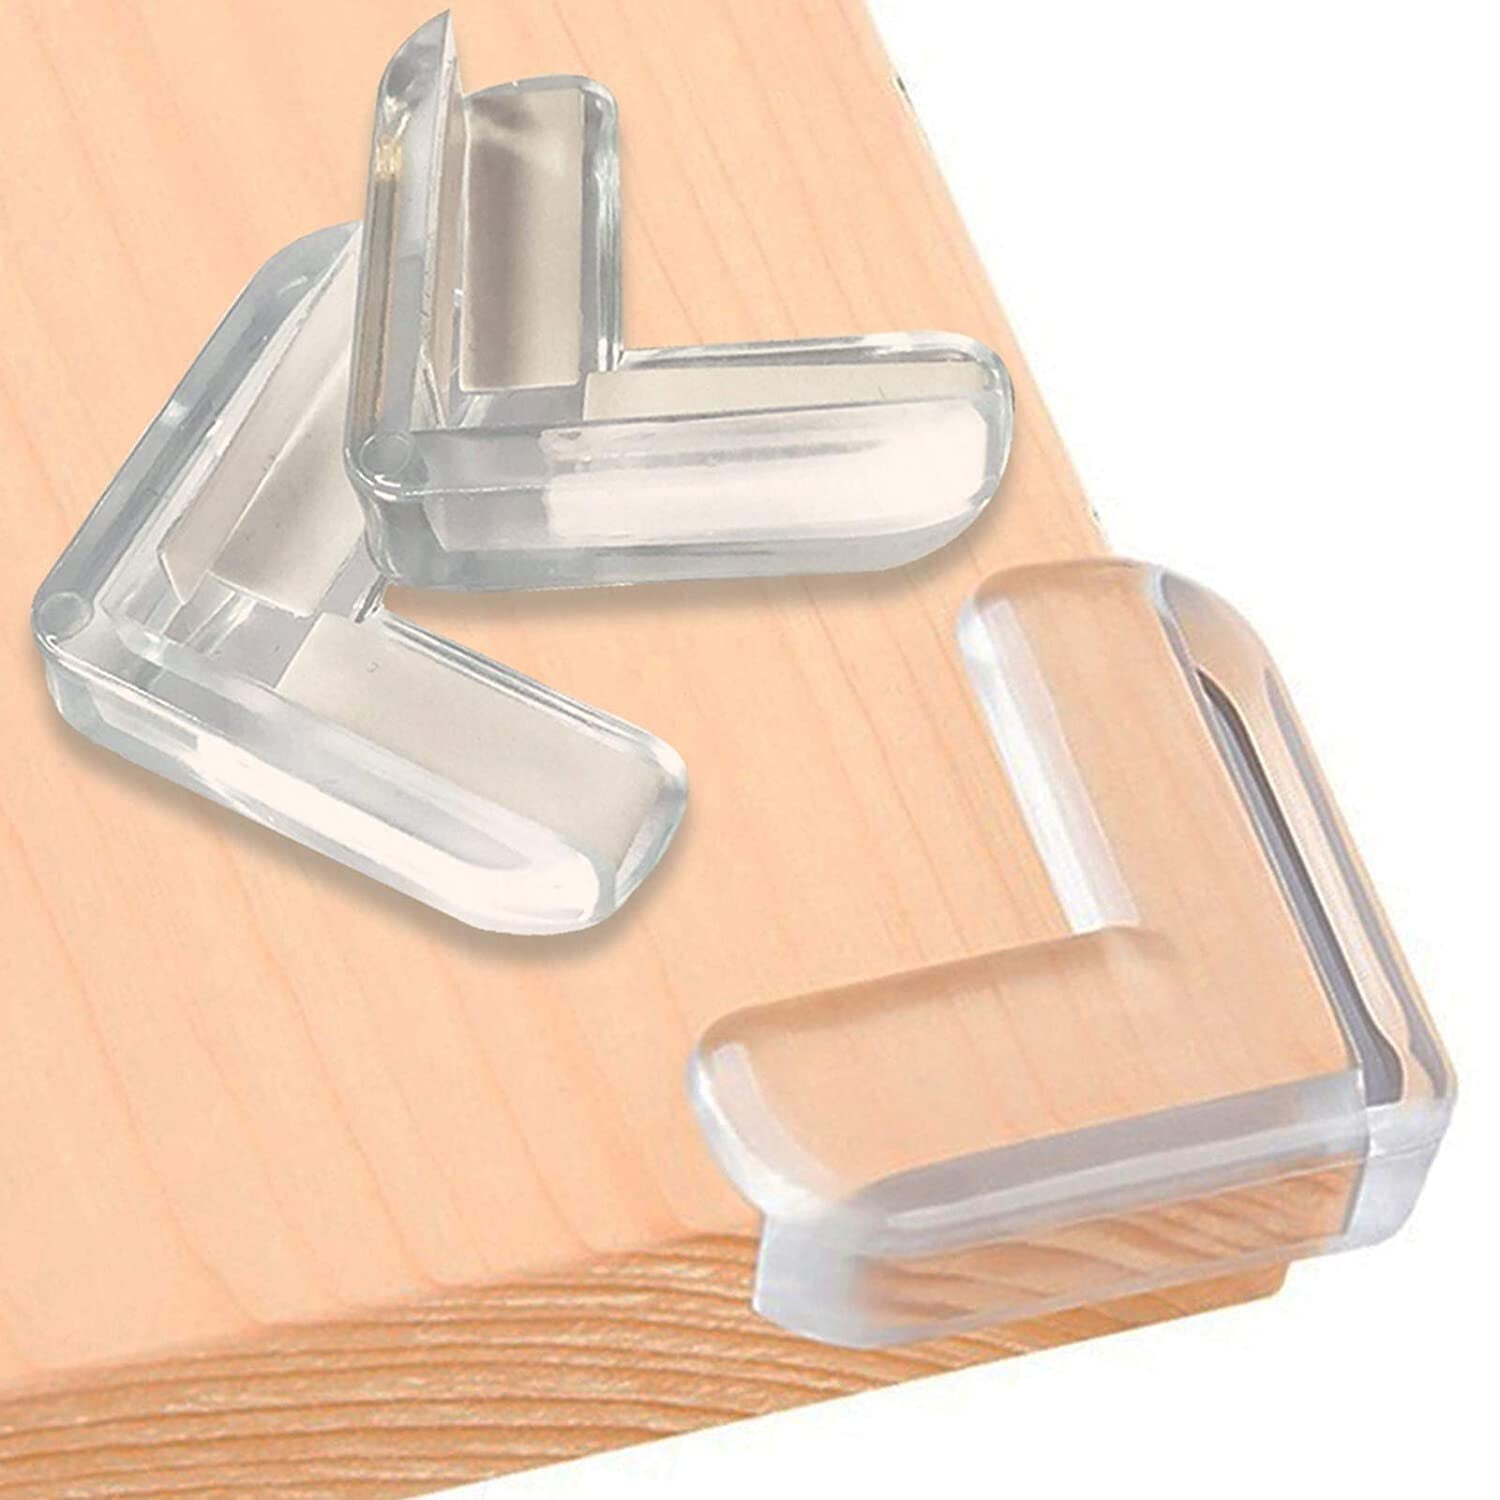 12 Pack Clear Corner Protector Baby,Corner Guards for Baby,Table Corner Guards Bumpers,High Resistant Adhesive Gel,Protector for Furniture and Glass Sharp Corners,Keep Baby Safe.